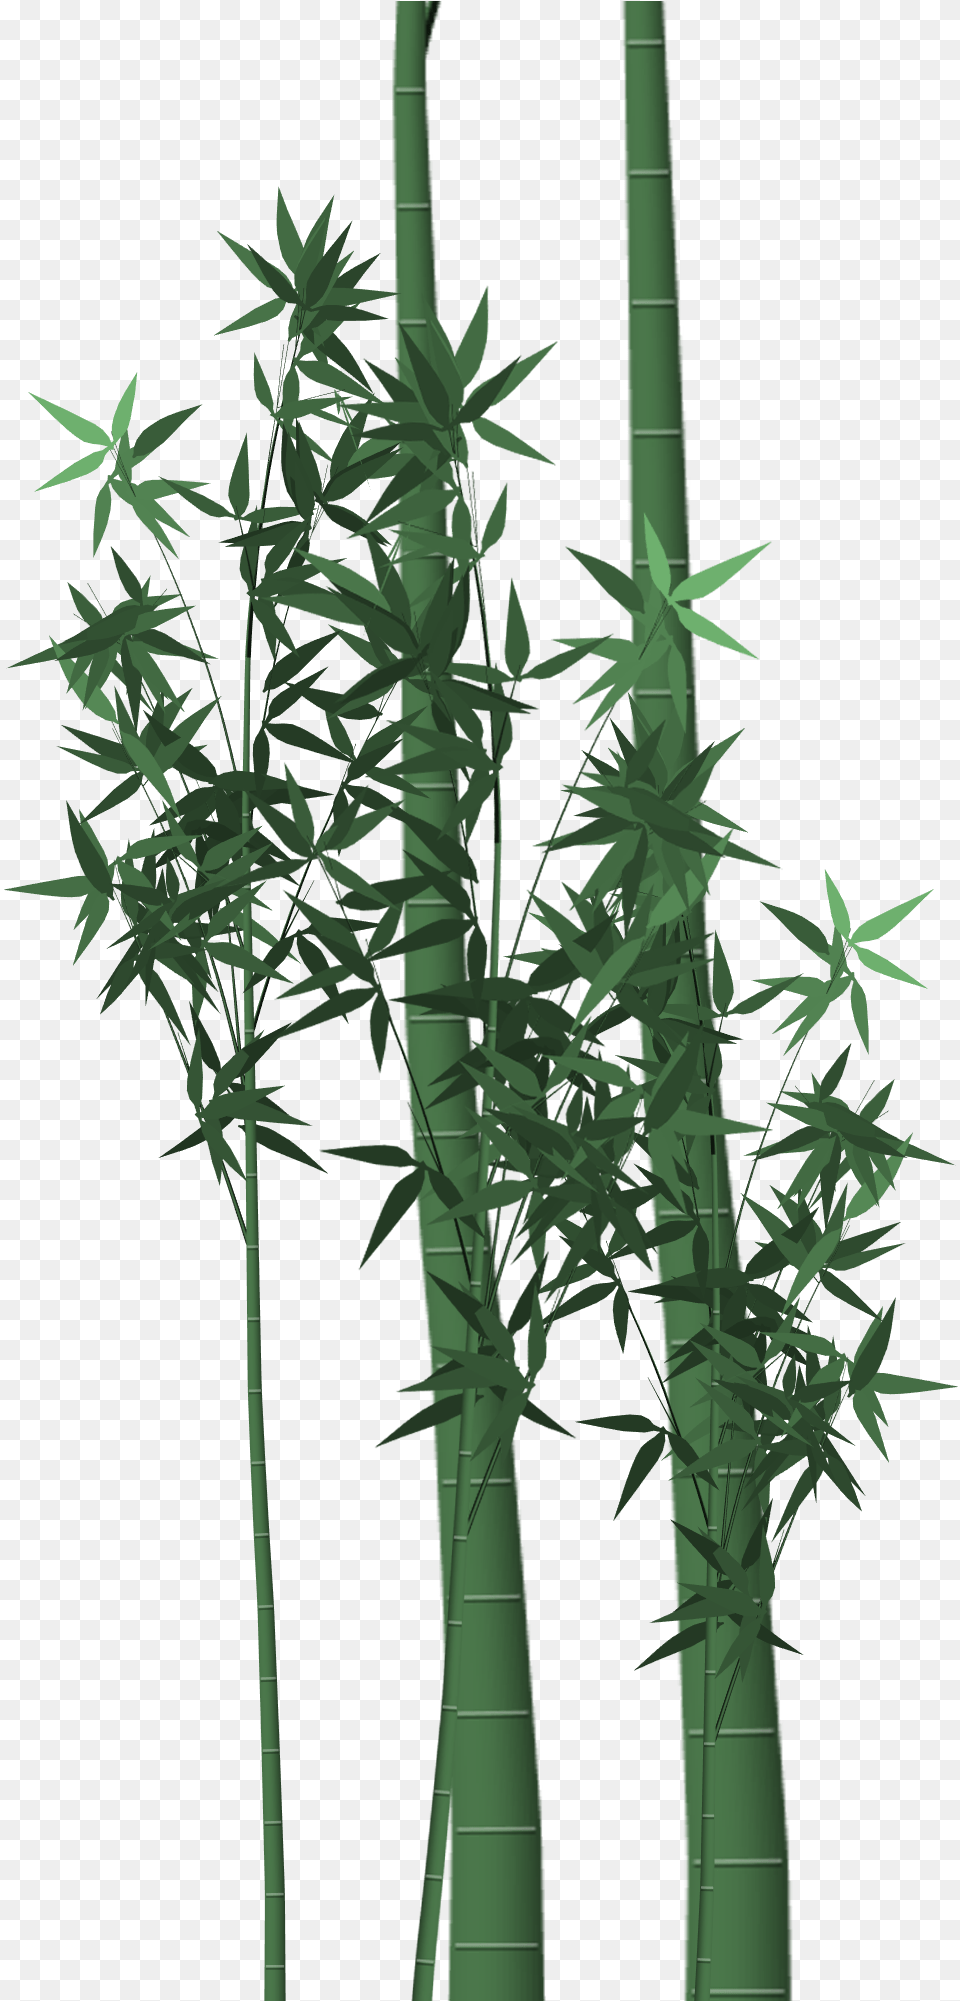 Bamboo With Leaves In A Graphic Representation Plant Free Transparent Png